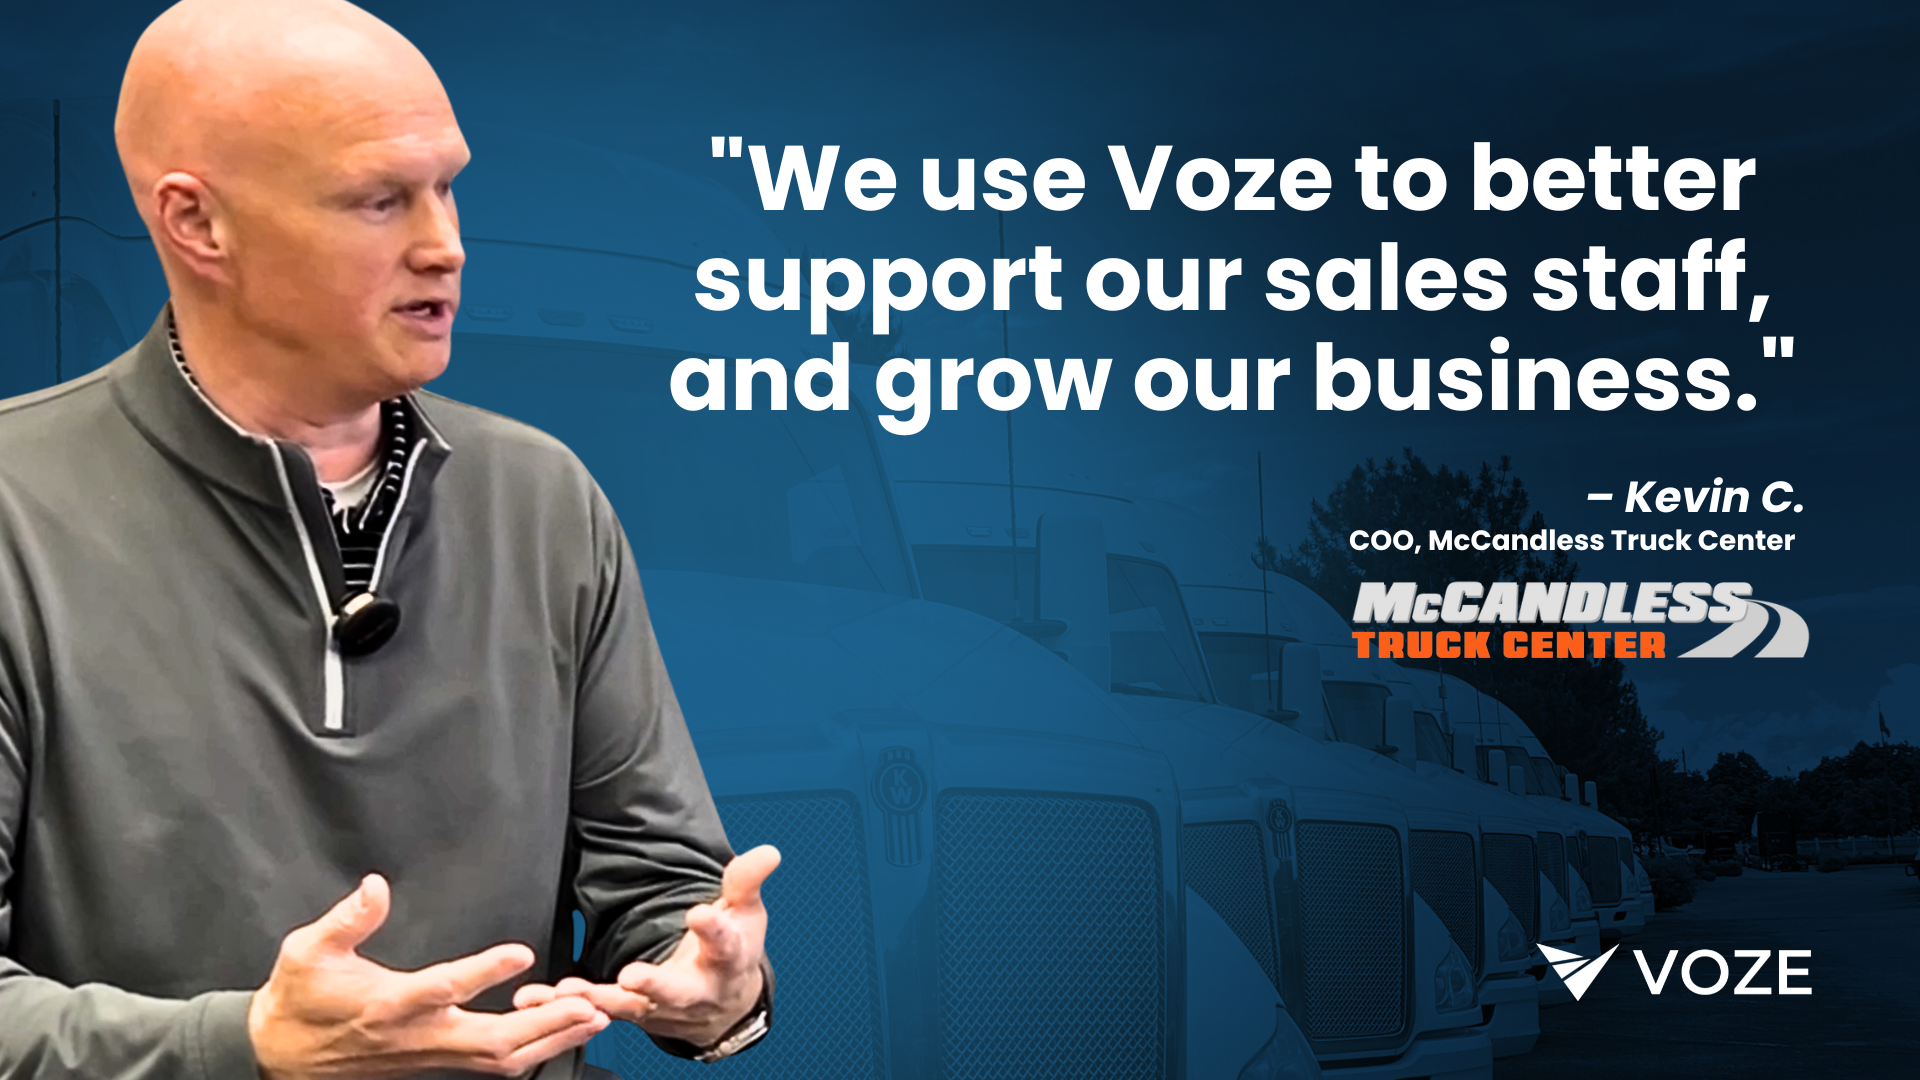 How McCandless Truck Center Gains More Visibility With Their Sales Reps In The Field